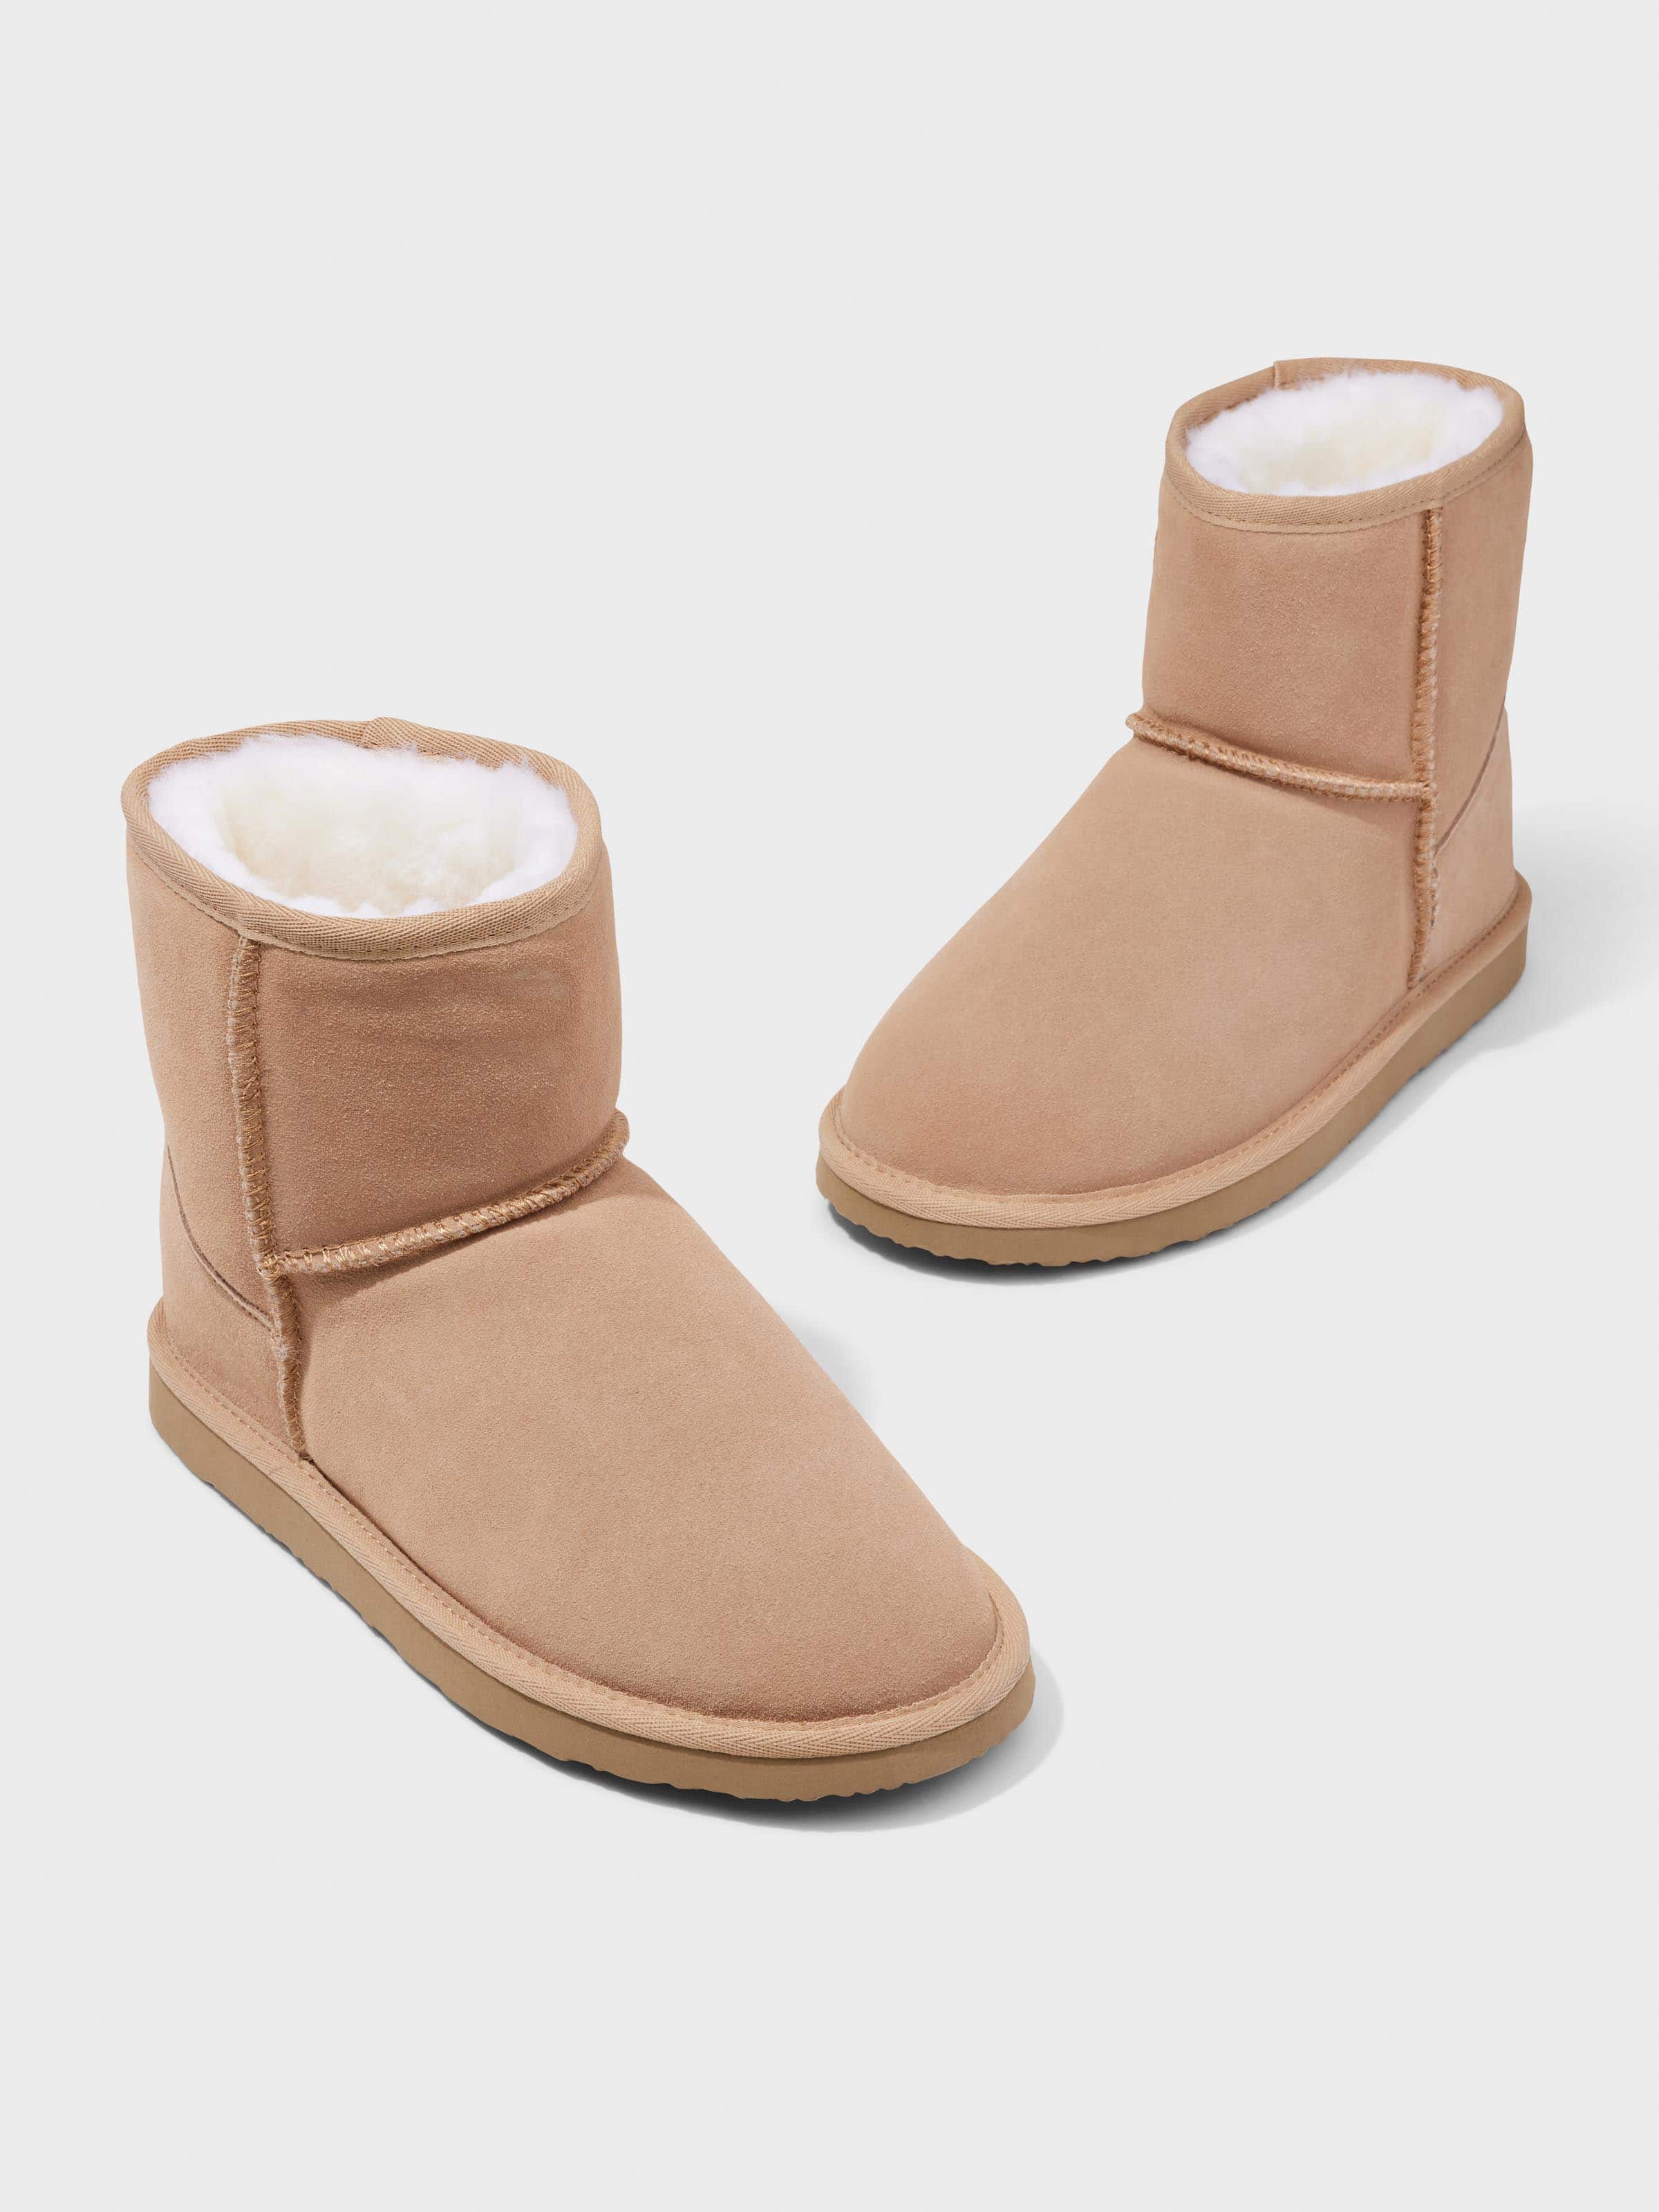 P.A. Classic Homeboots